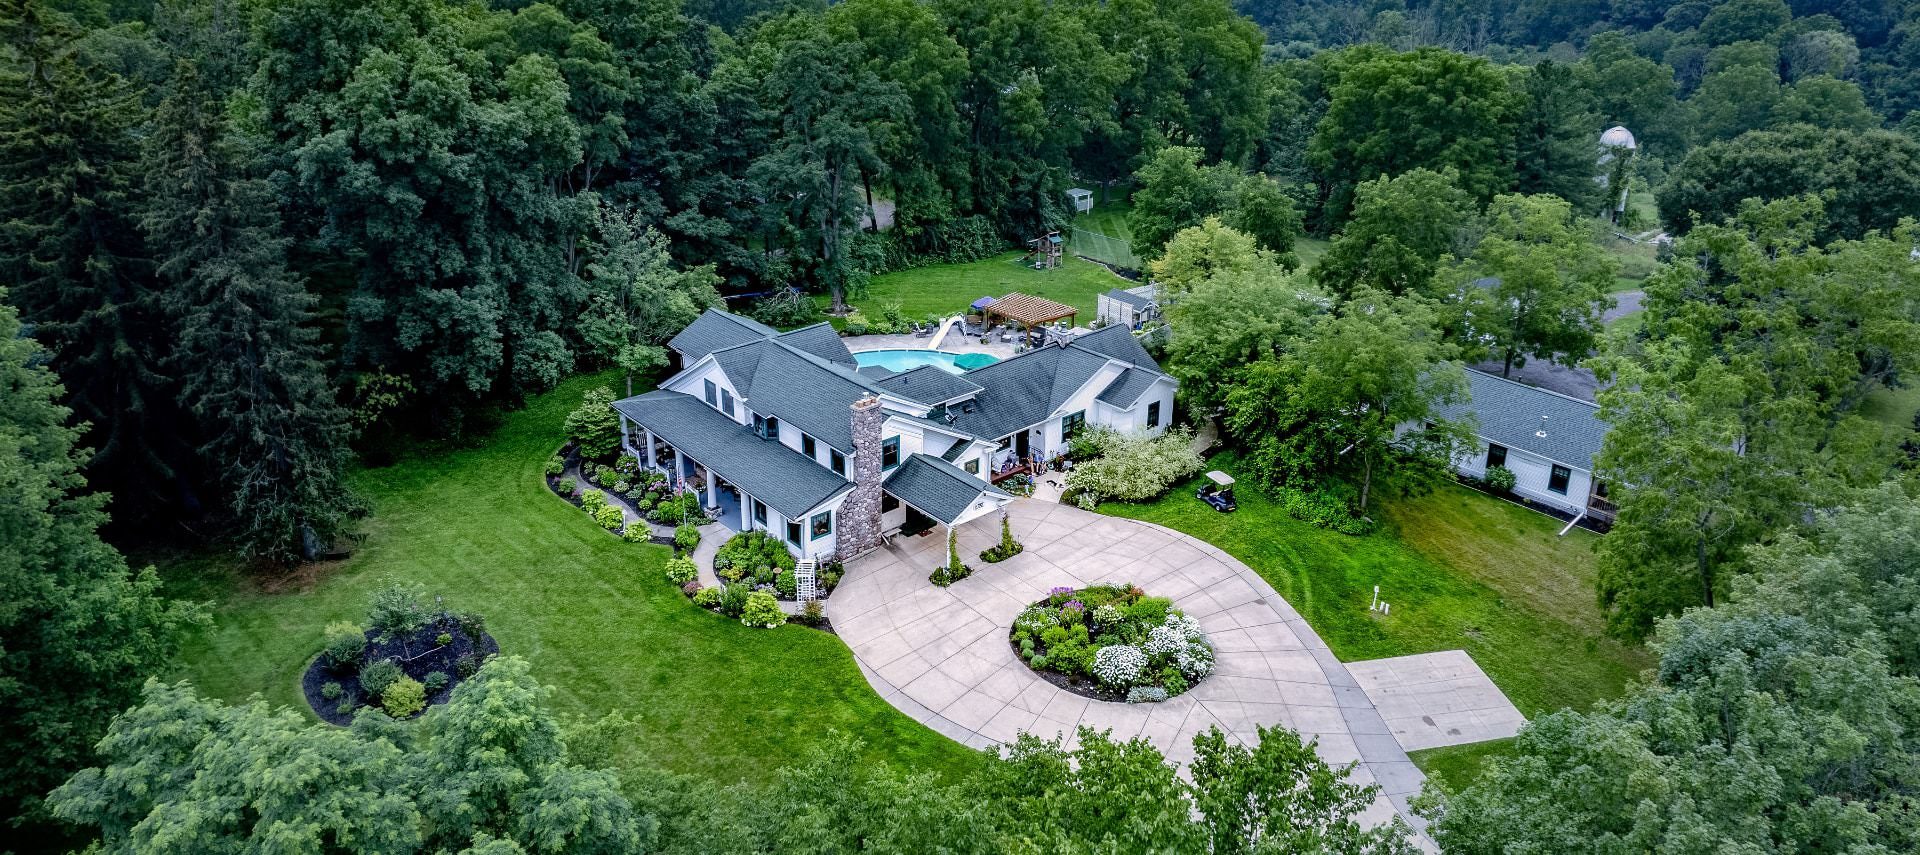 Aerial view of the property painted white with white and teal trim, stone fireplace, large driveway, and surrounded by lush trees, bushes, grass, and flowers